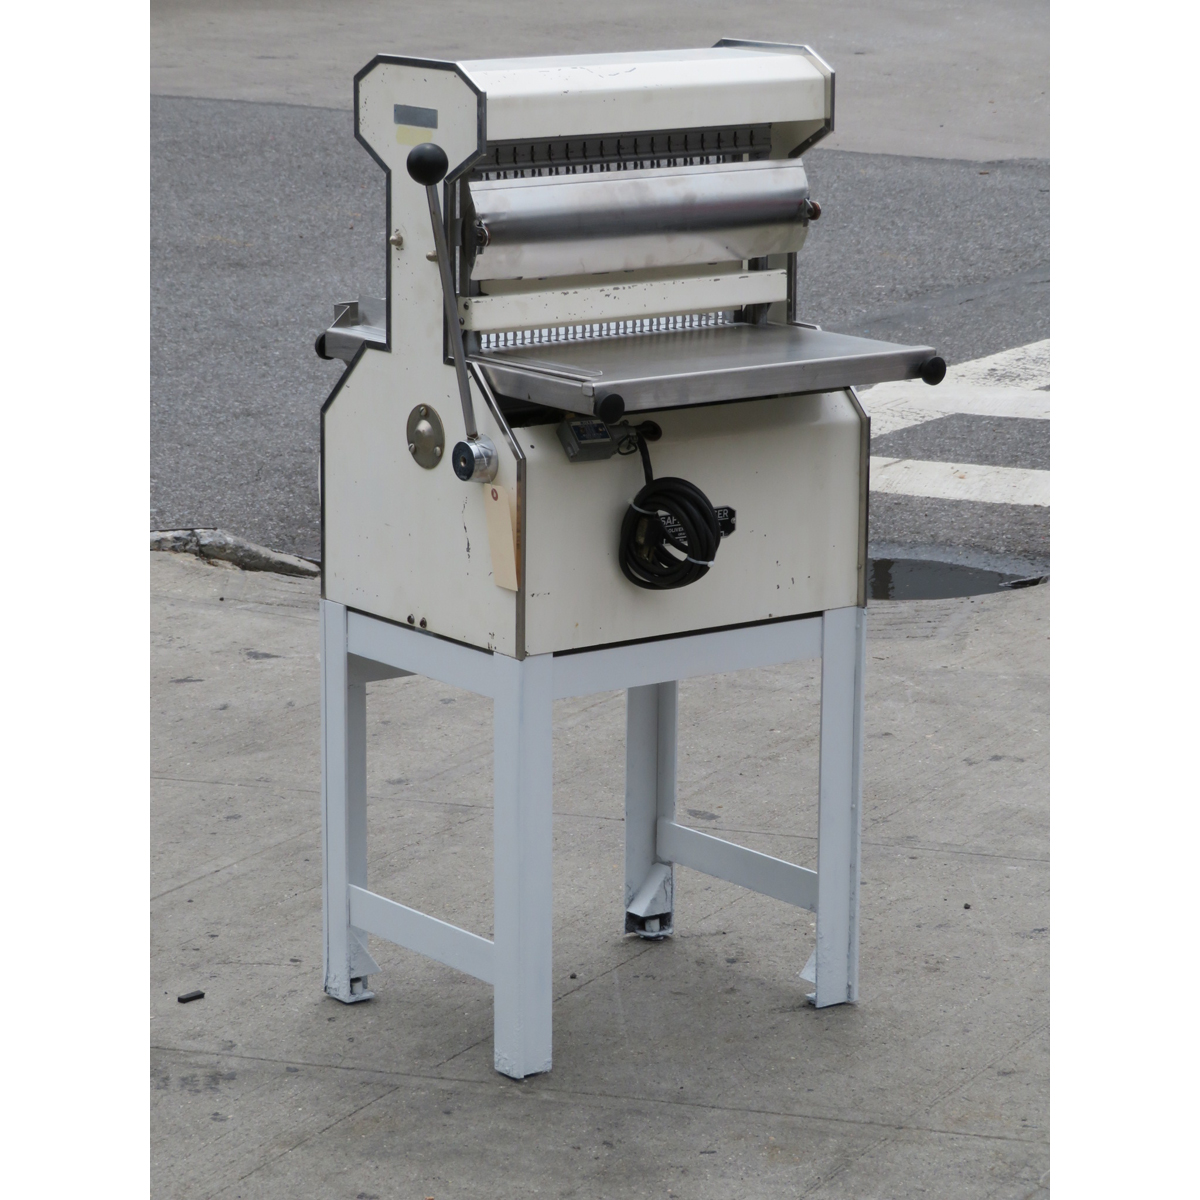 Oliver 777 Bread Slicer 1/2" Cut, Used Excellent Condition image 1